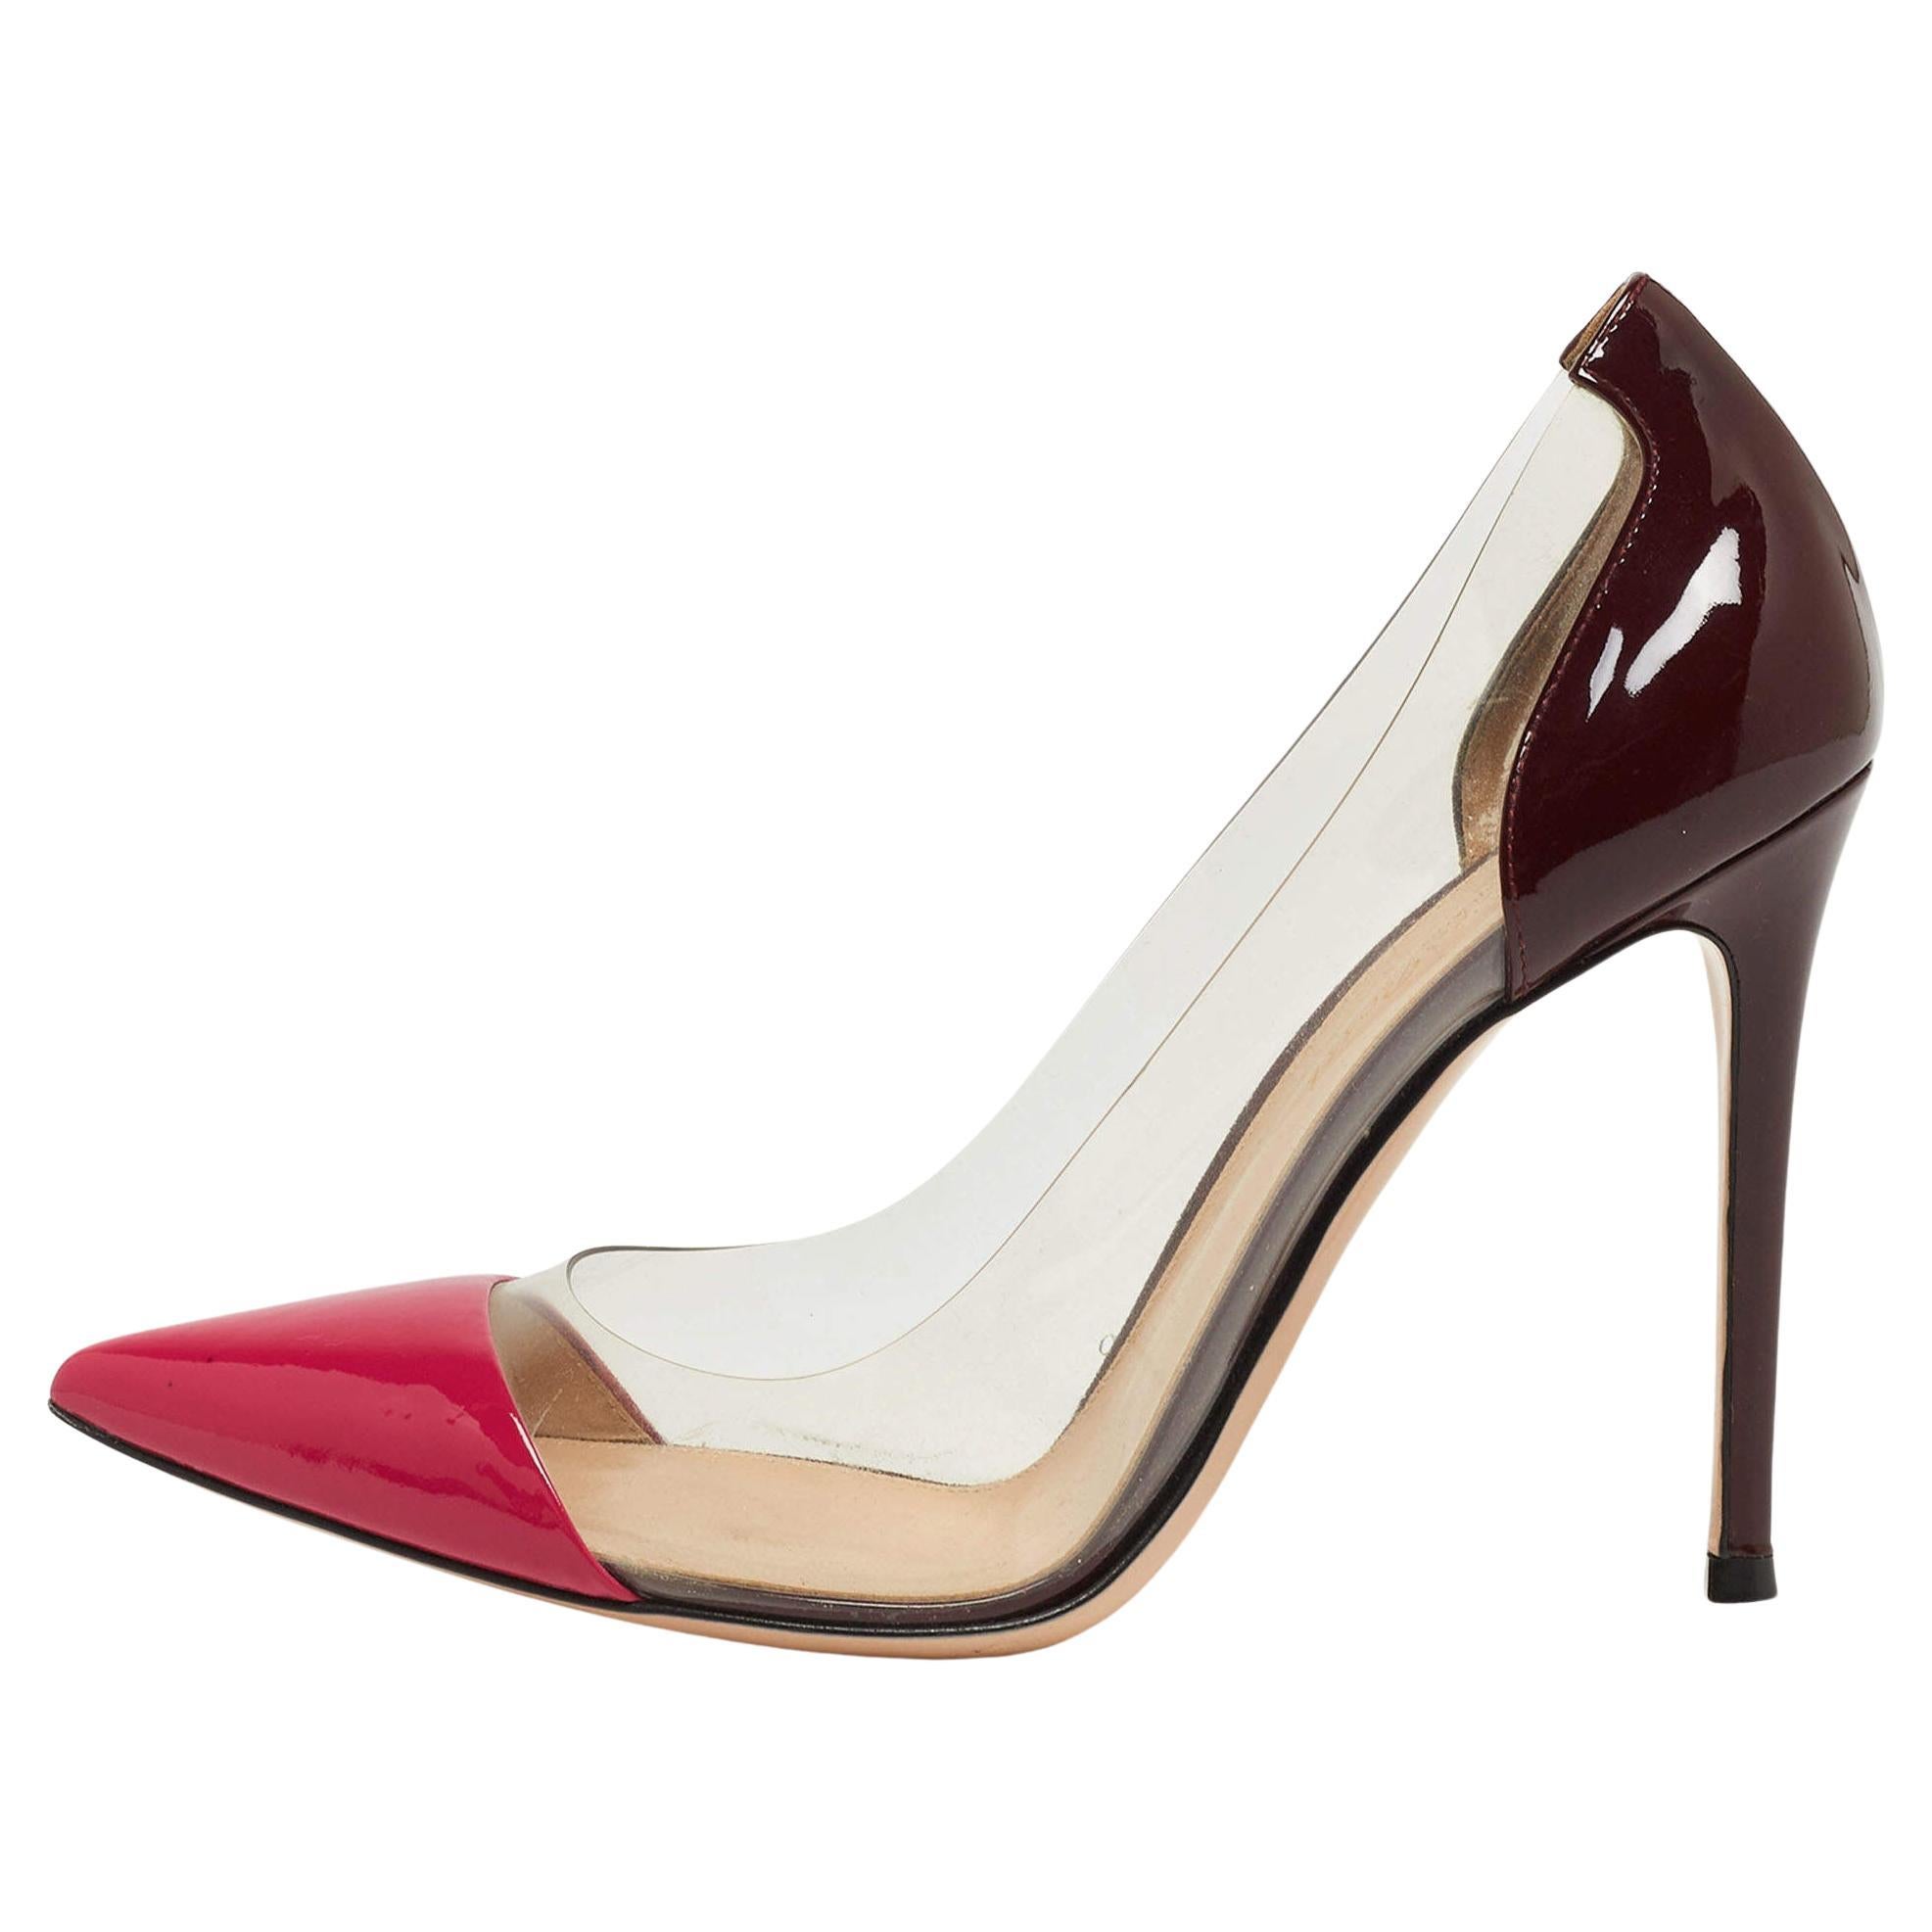 Gianvito Rossi Pink/Burgundy Patent Leather and PVC Plexi Pumps Size 38.5 For Sale